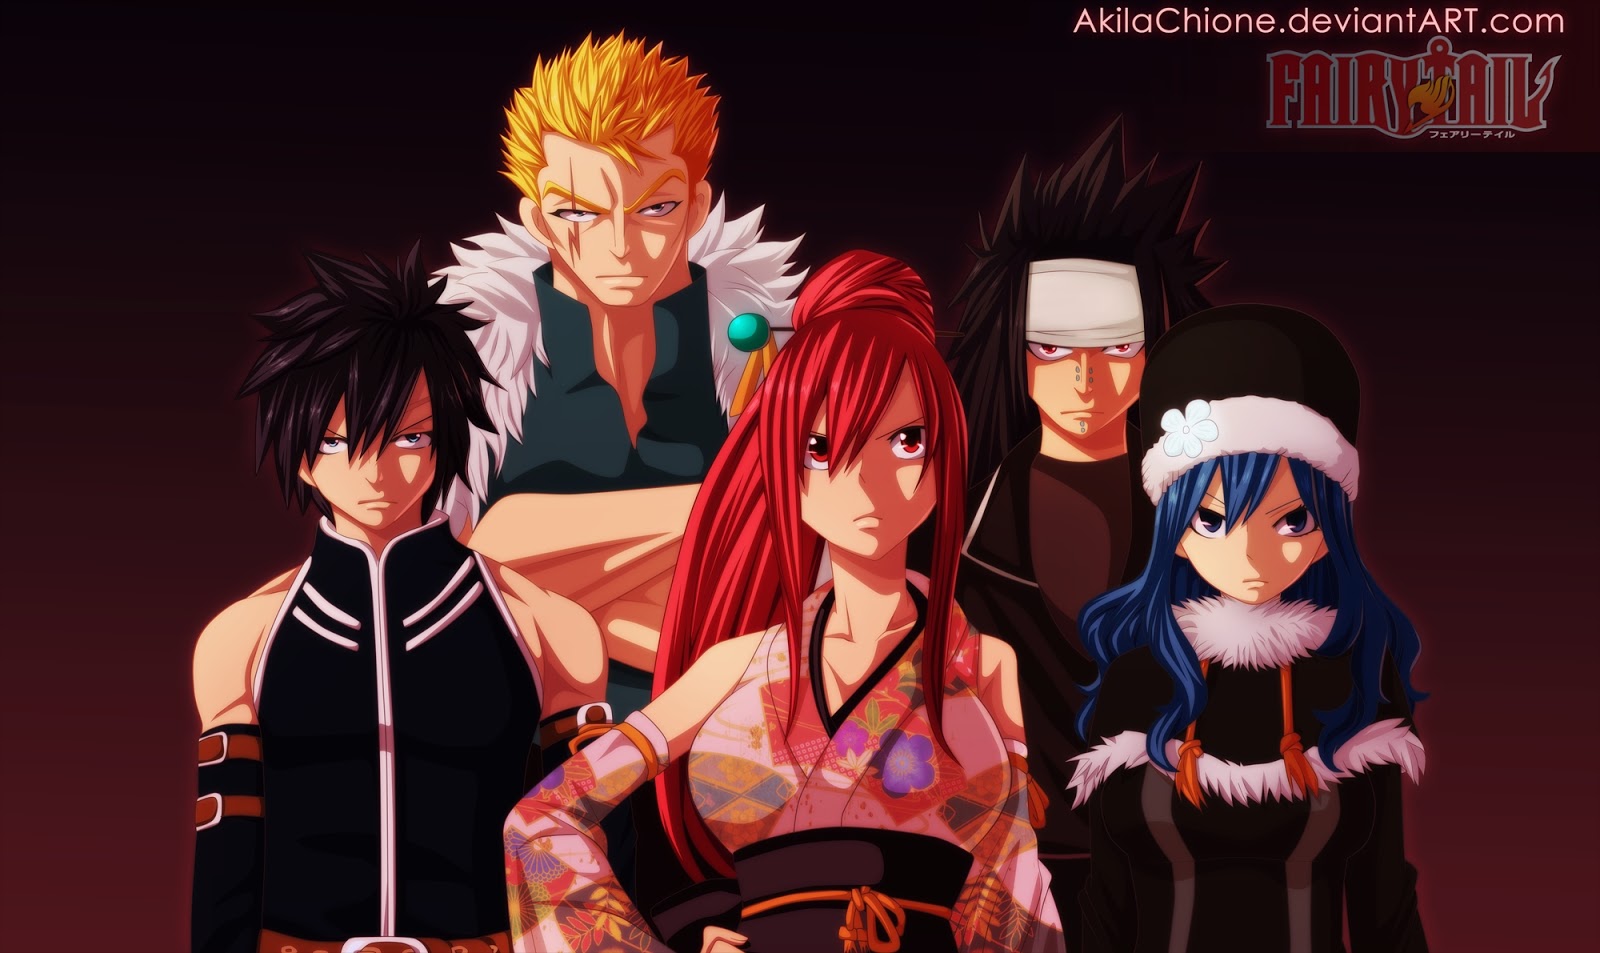 70+ Anime Fairy Tail Wallpapers HD (2020) - Page 5 of 6 - We 7